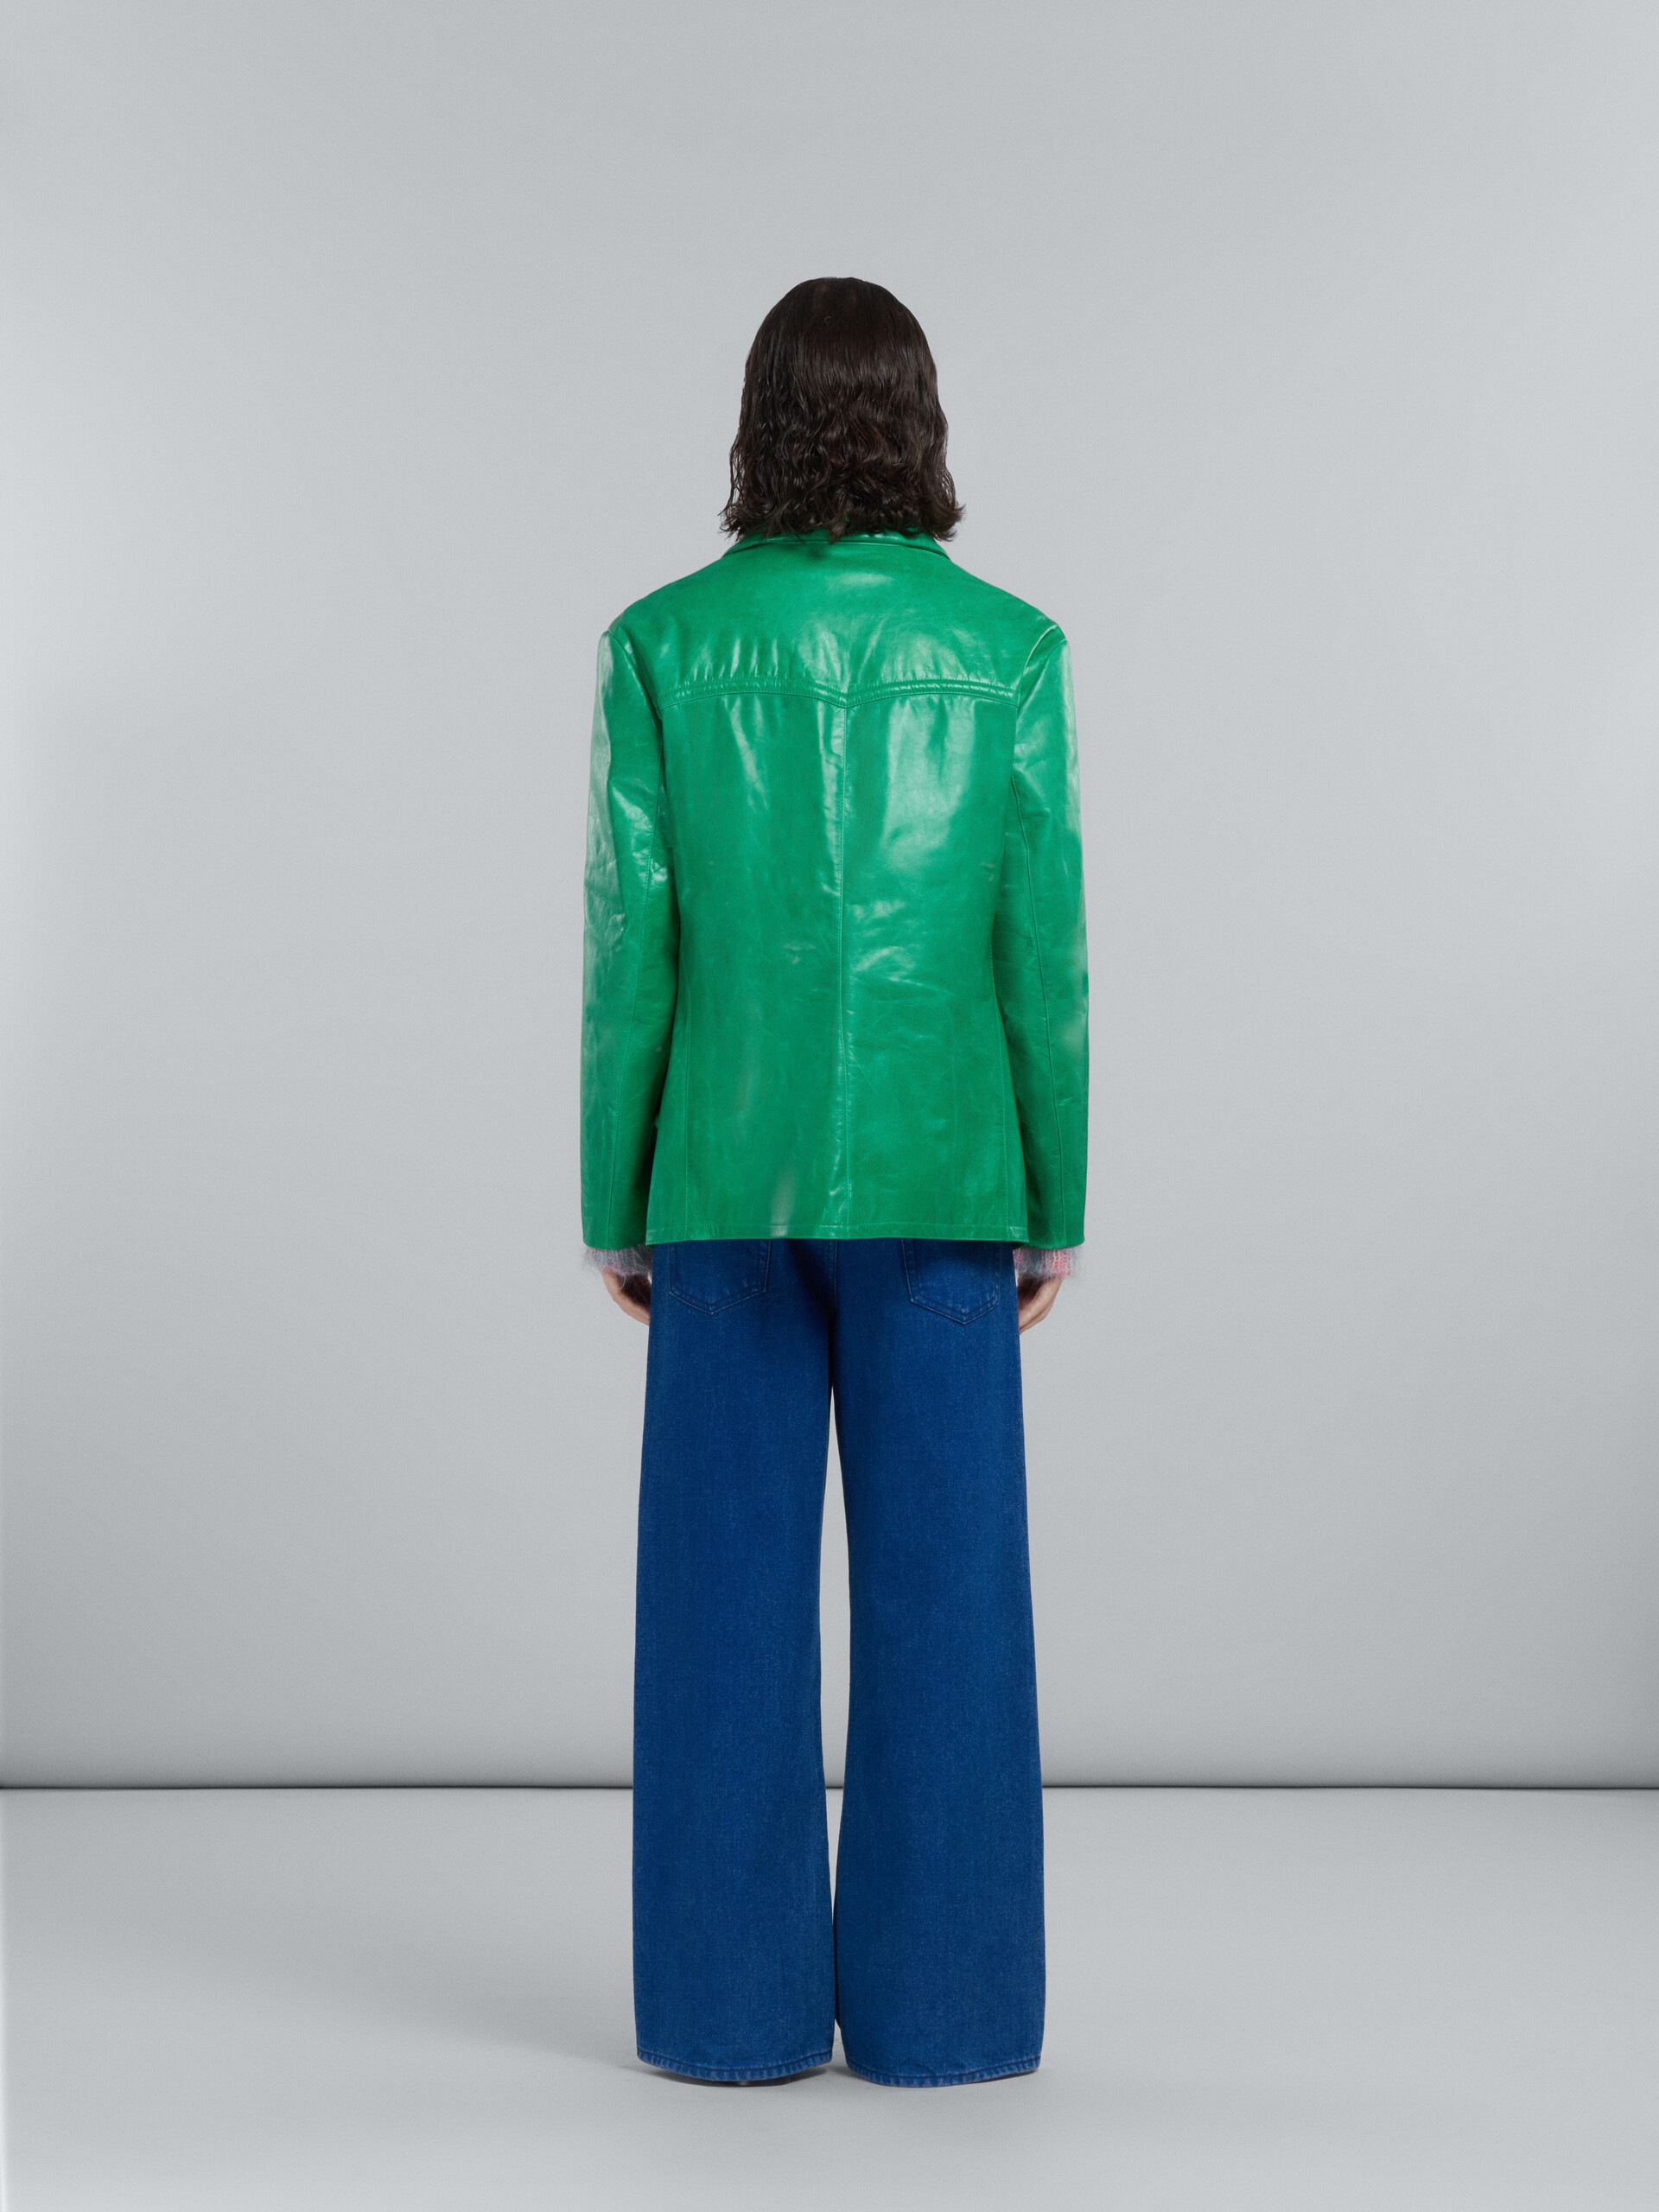 Double-breasted jacket in shiny green leather - Coats - Image 3